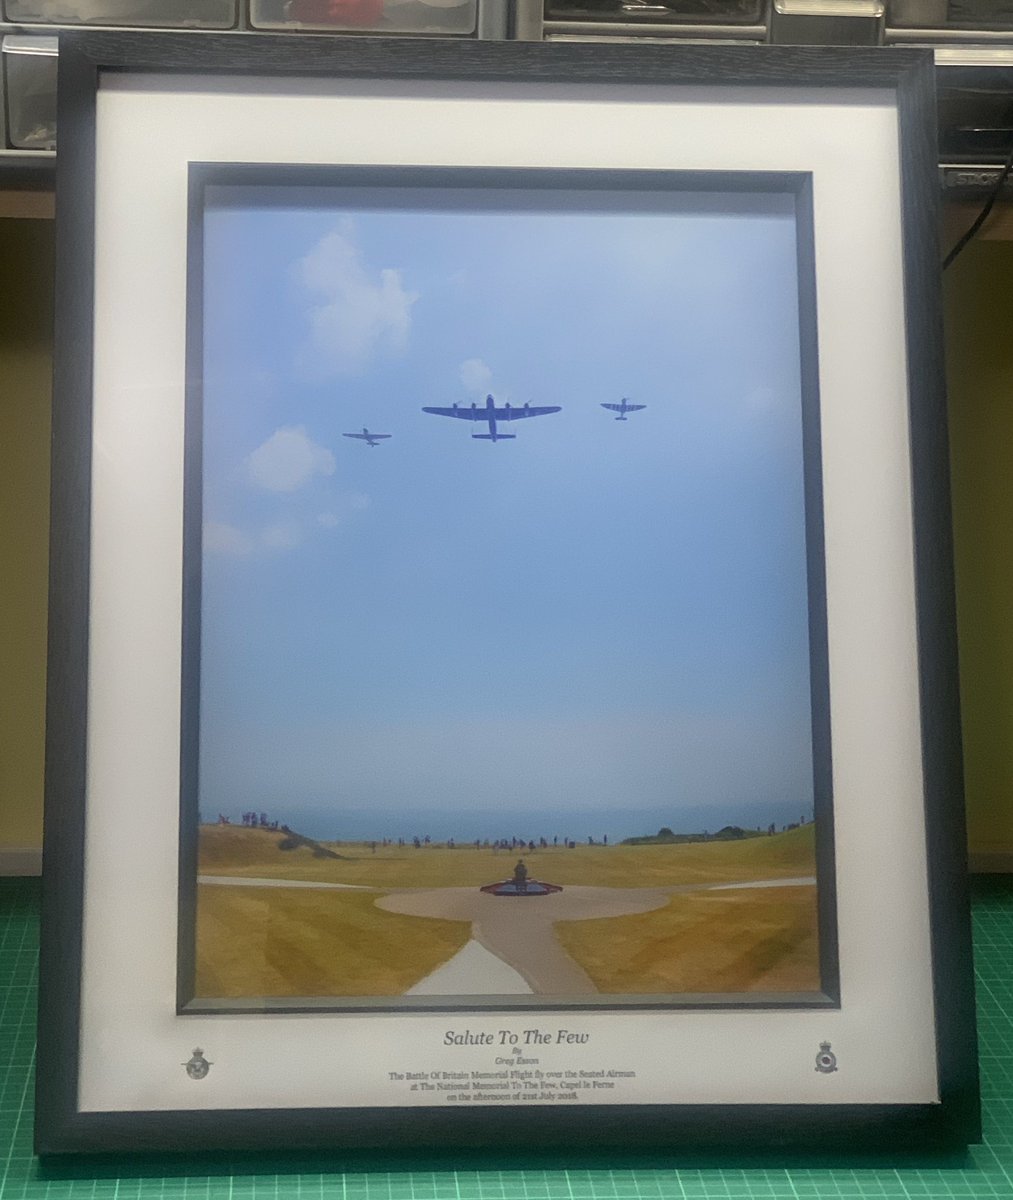 Here’s a sneak preview of some more of the framed pictures I’m donating to @Memorial_theFew (hopefully soon). Lots more still to get done, and some more experimenting with these frames before I can finalise them. Sparkly enough for Christmas @BurnsMurphy ?? 🎄 🎅 🎁 @RAFBBMF